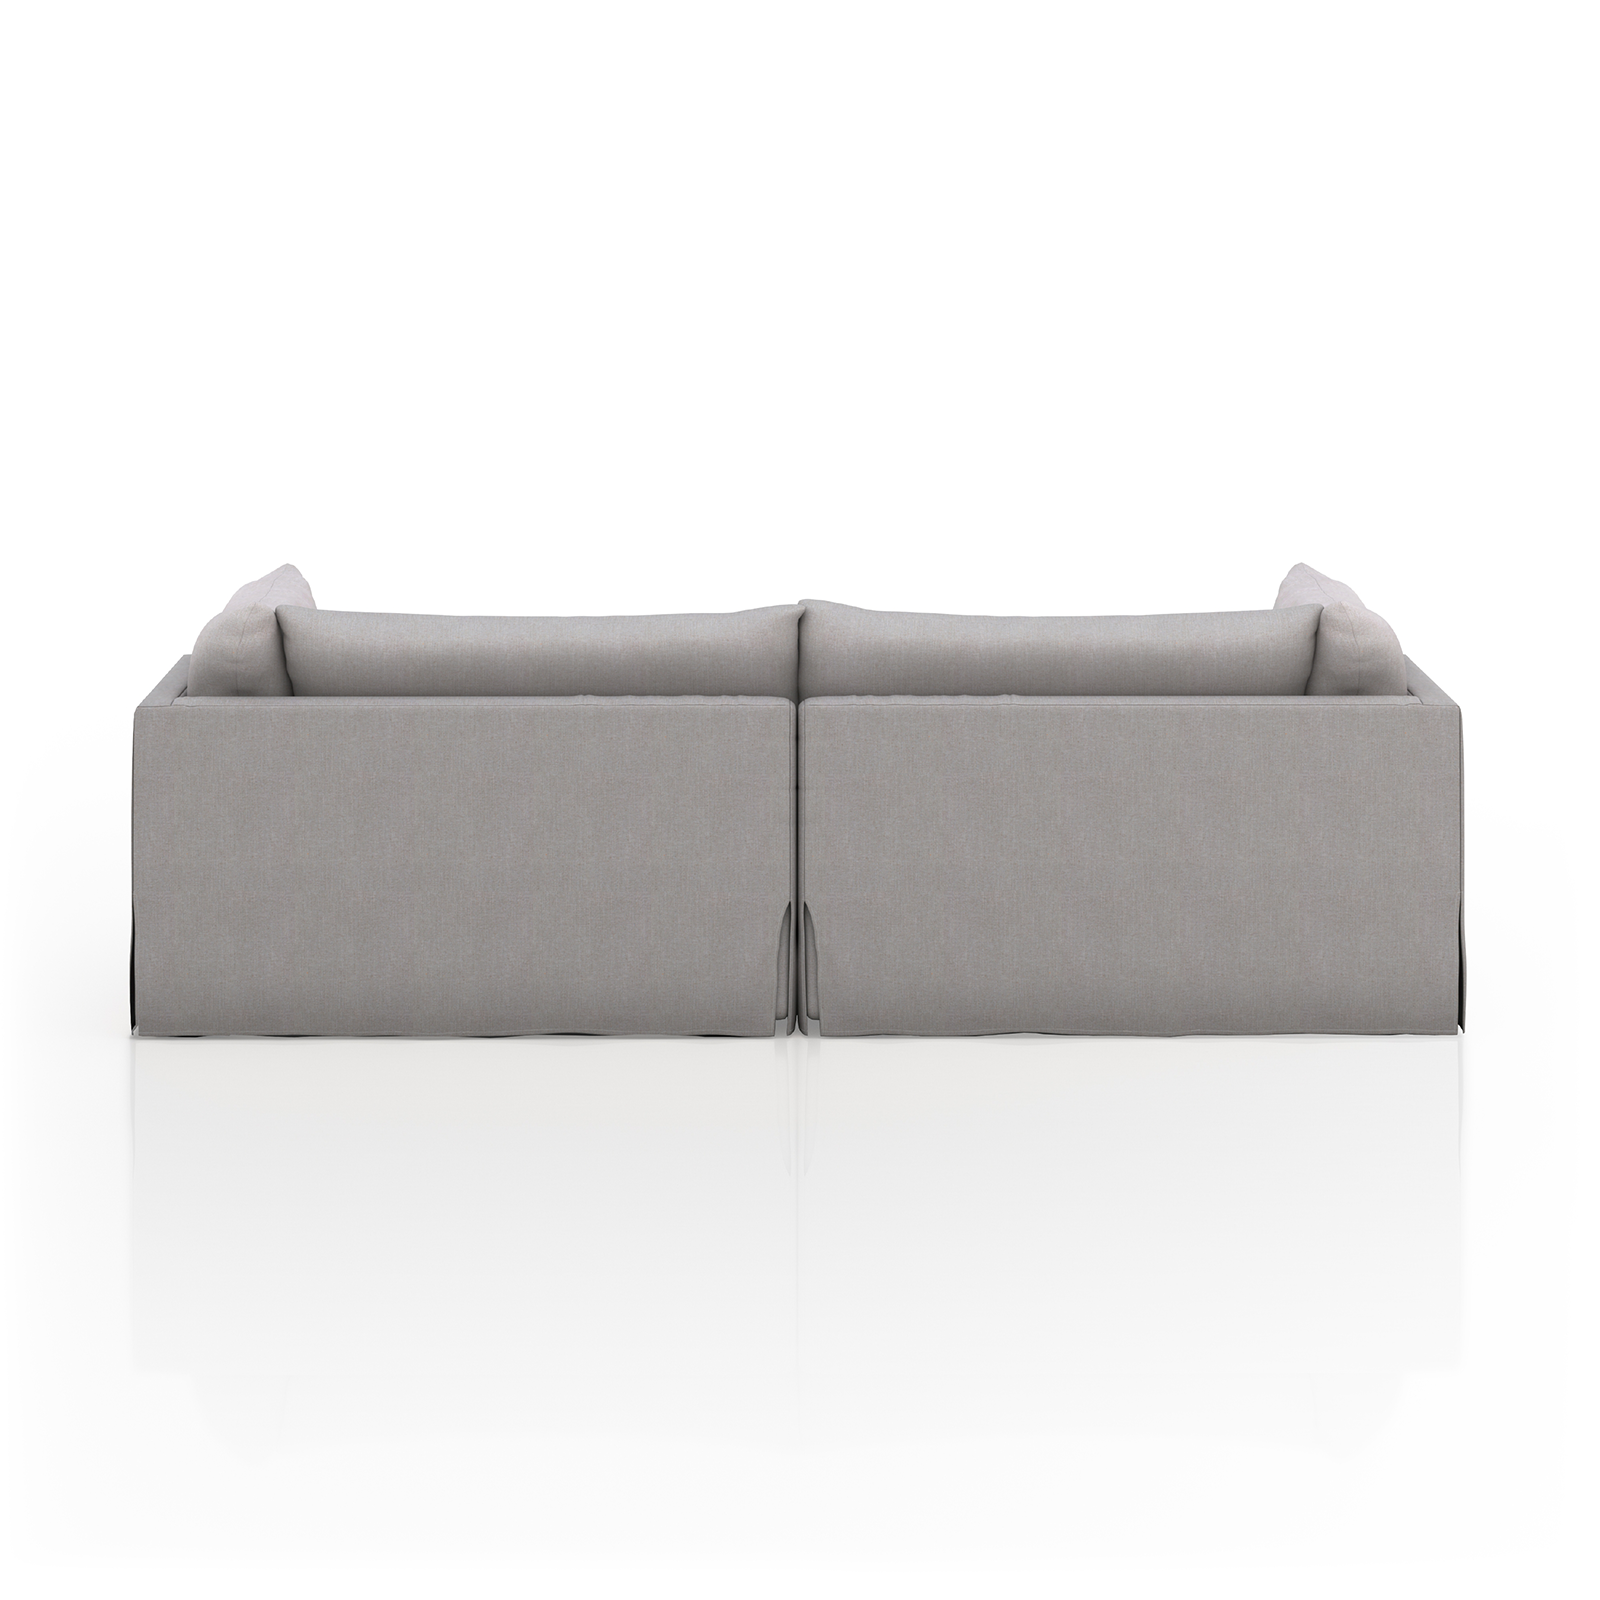 Kilmer 102" Double Chaise Sectional